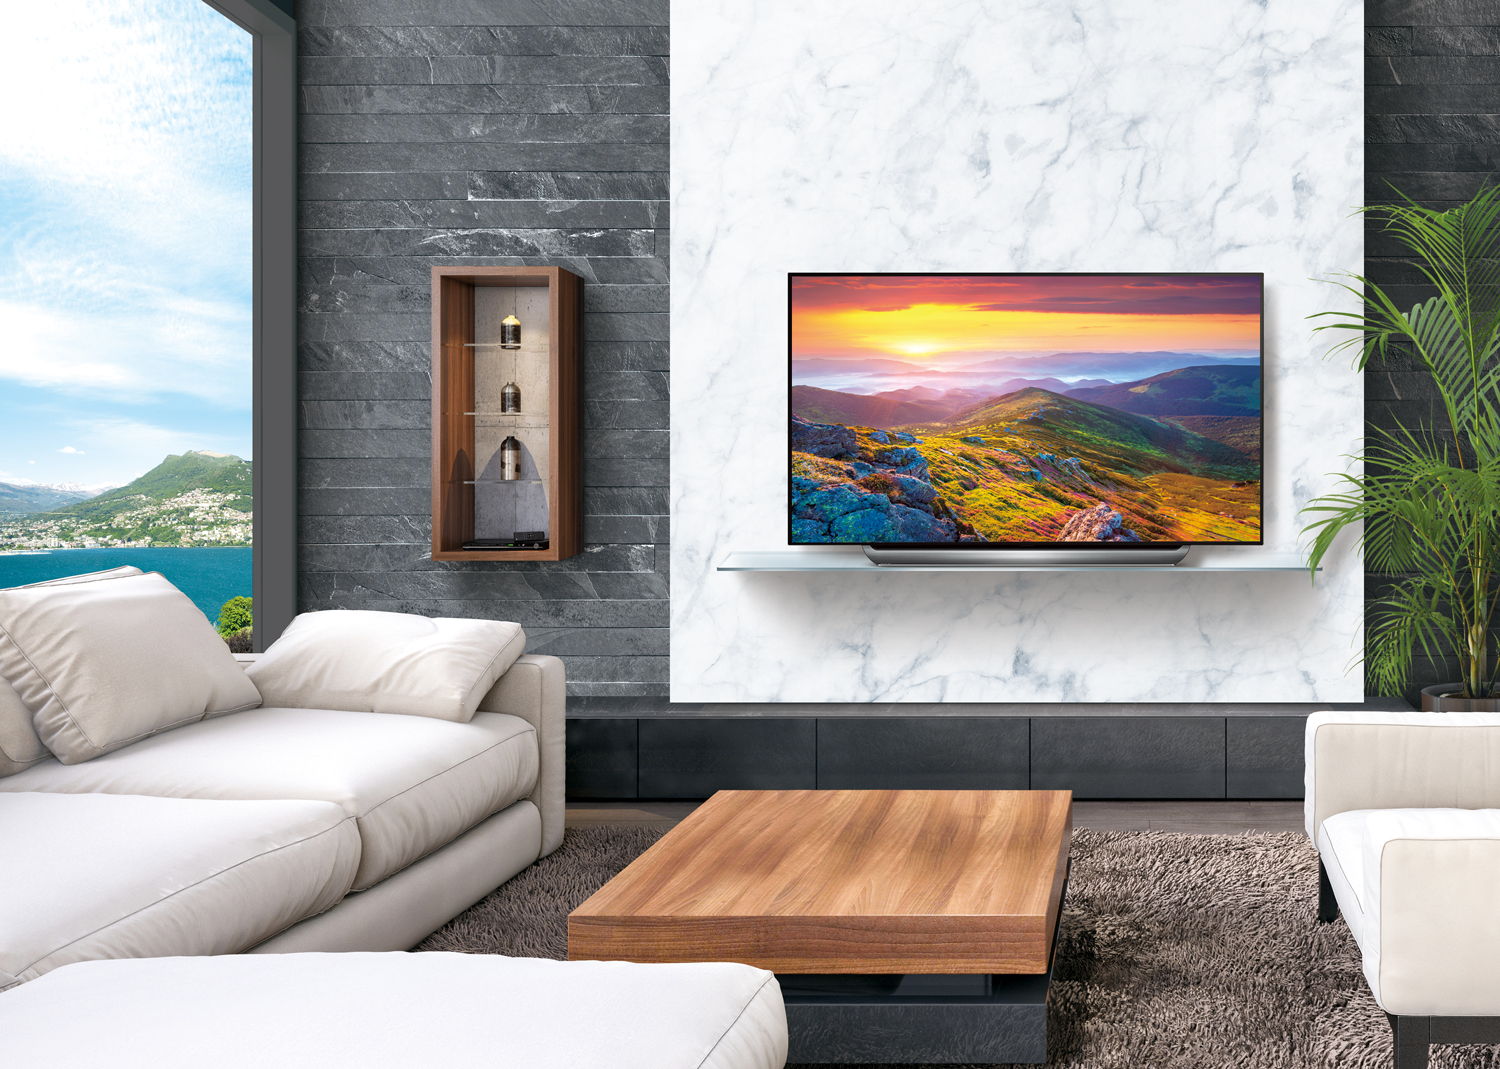 The Newest LG OLED Hotel TV Combines a Cinematic Viewing Experience with a Razor-Thin Display